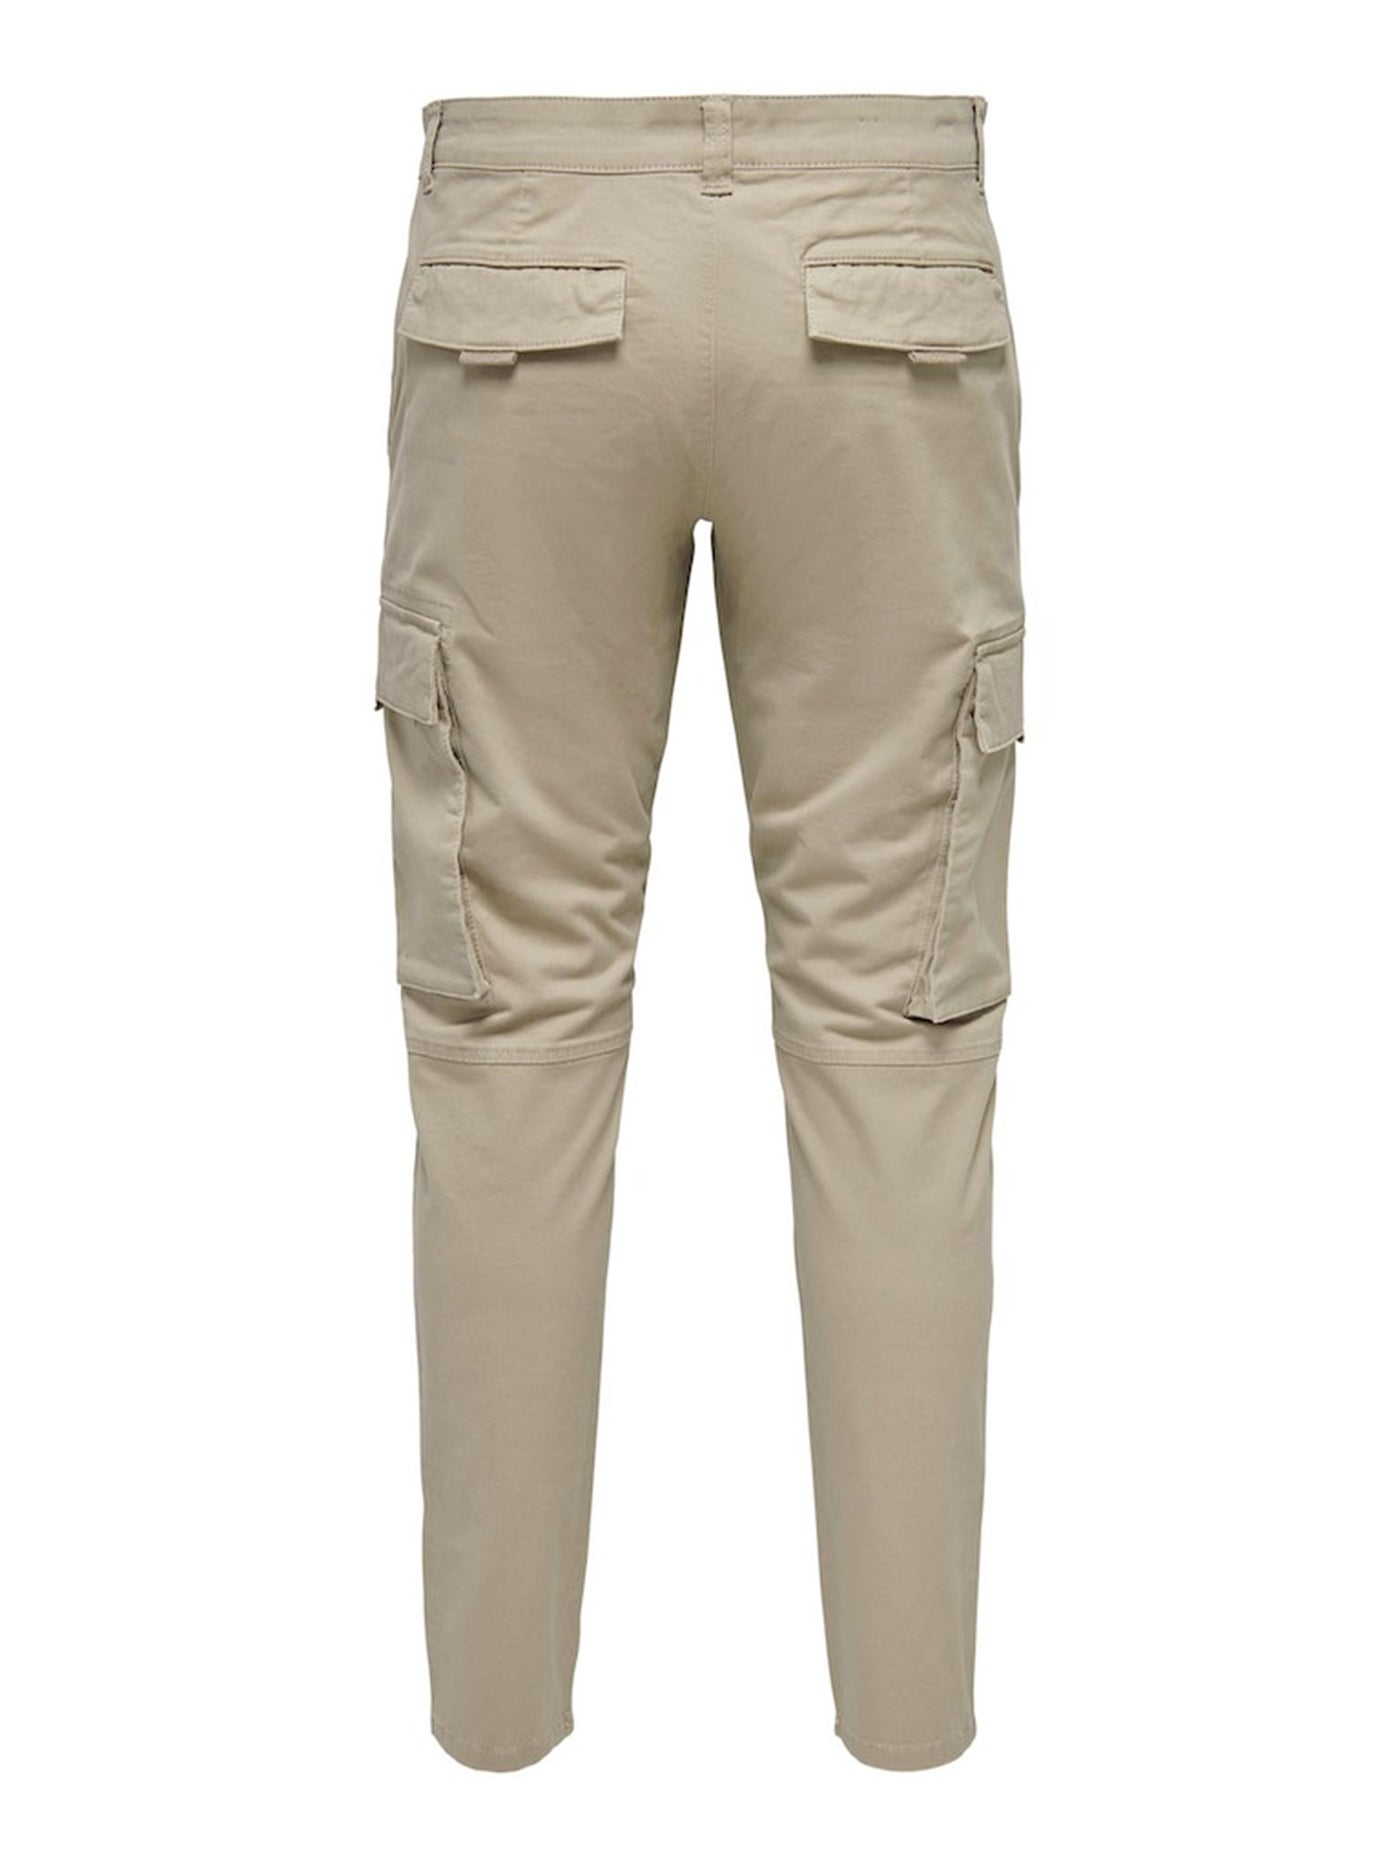 Next Cargo Pants - Chinchilla - Only & Sons - Sand/Beige 7